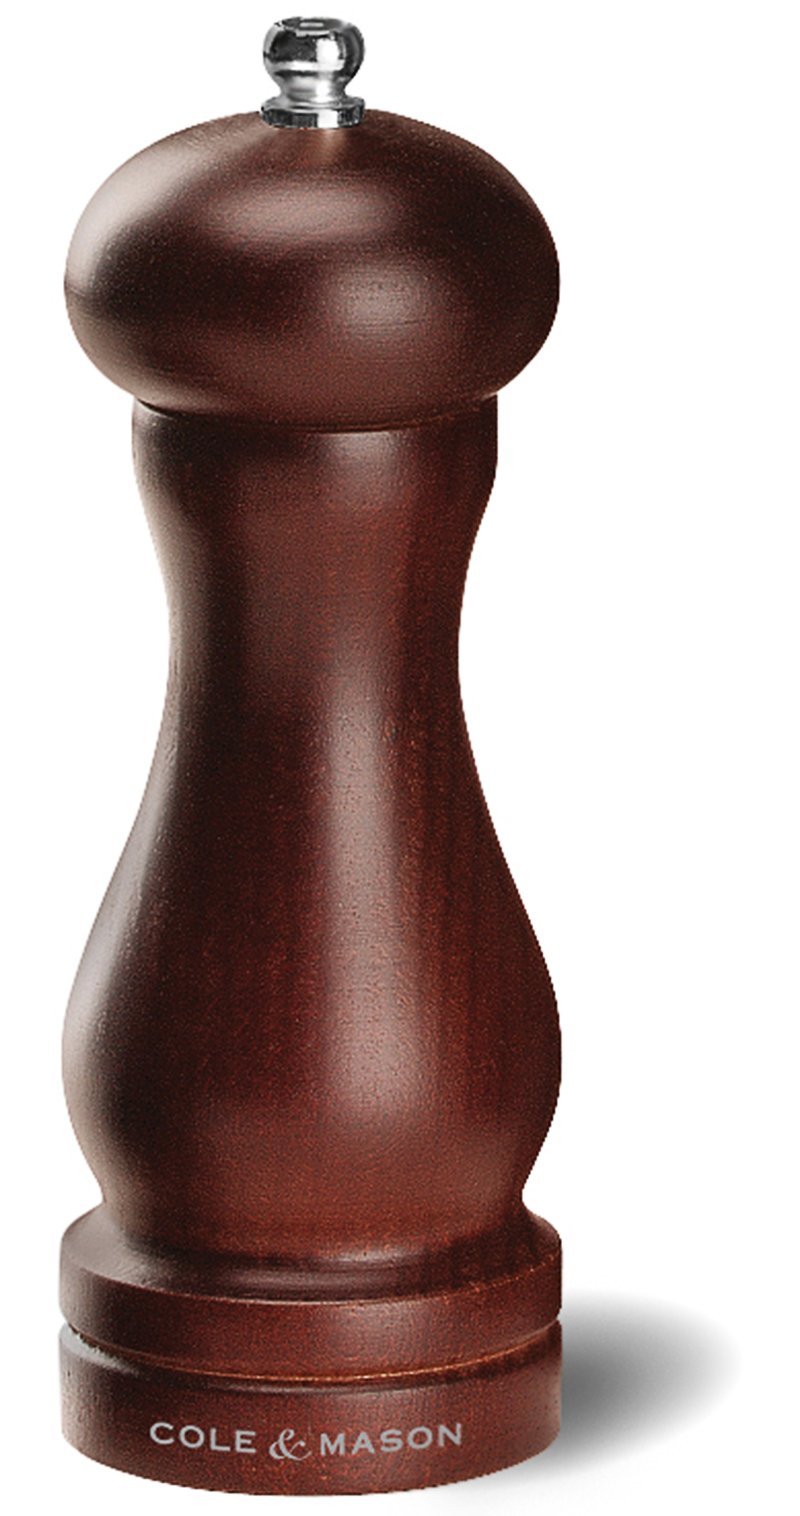  [AUSTRALIA] - COLE & MASON Capstan Wood Pepper Grinder - Wooden Mill Includes Precision Mechanism, 6.5 inch 6.5- Inch